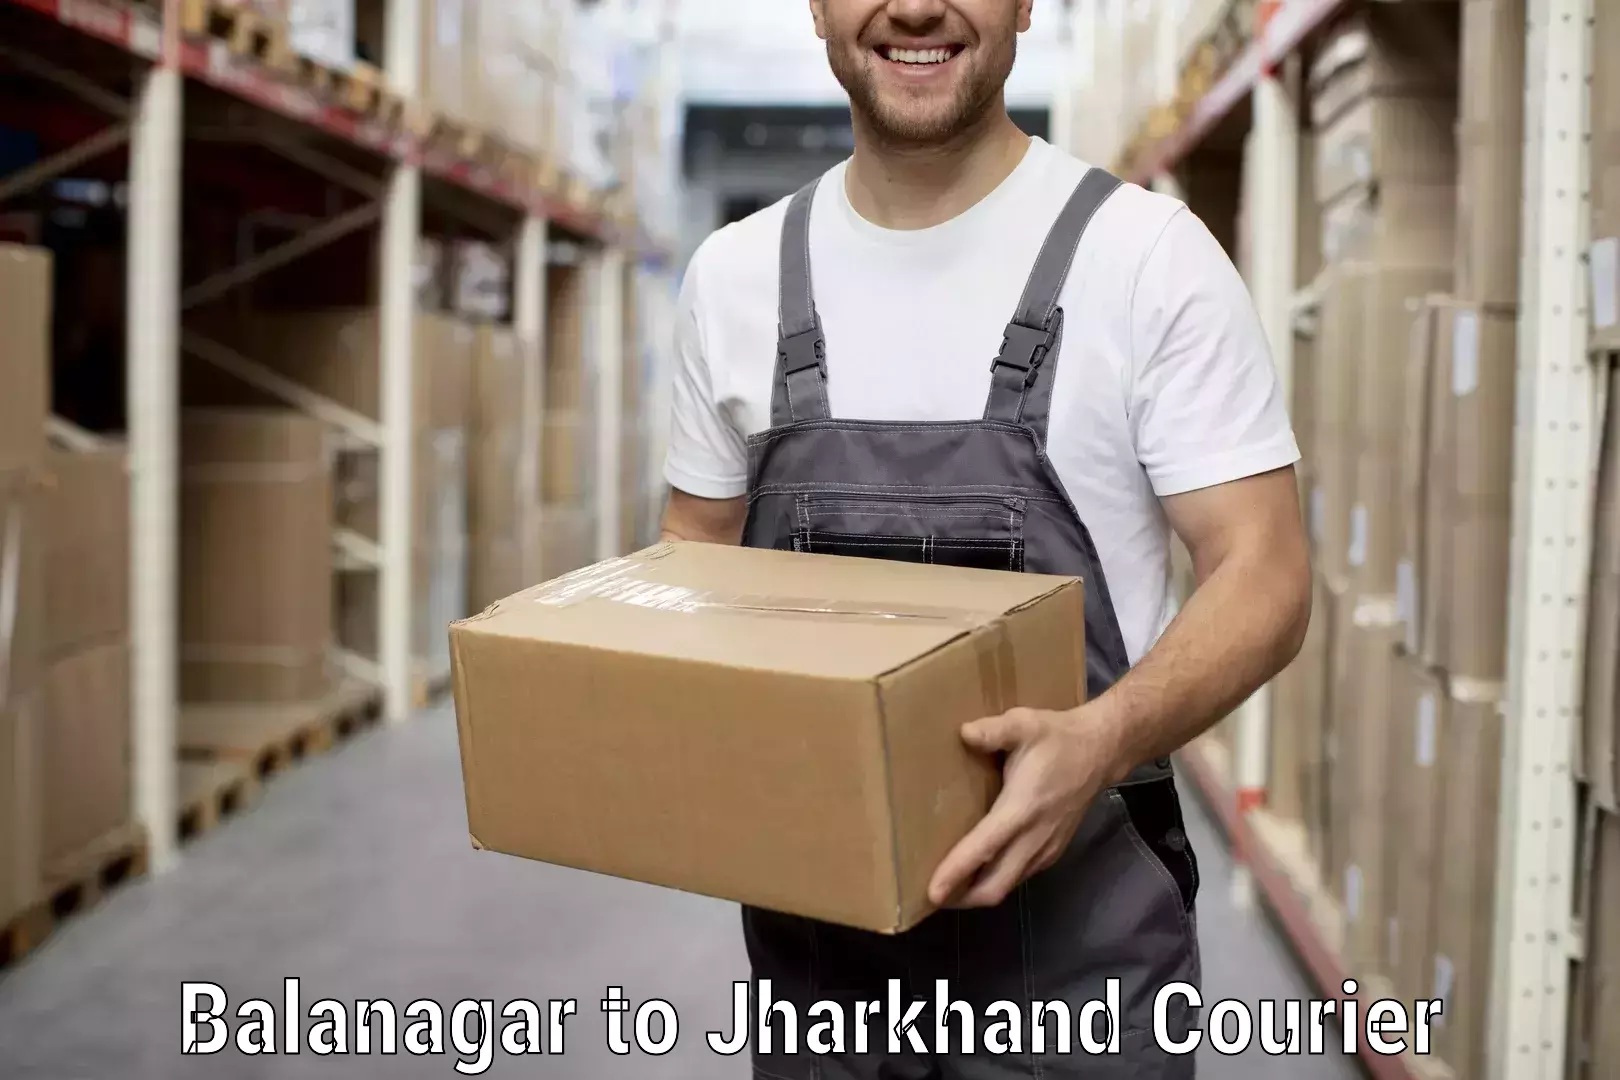 Trusted home movers in Balanagar to Dhanbad